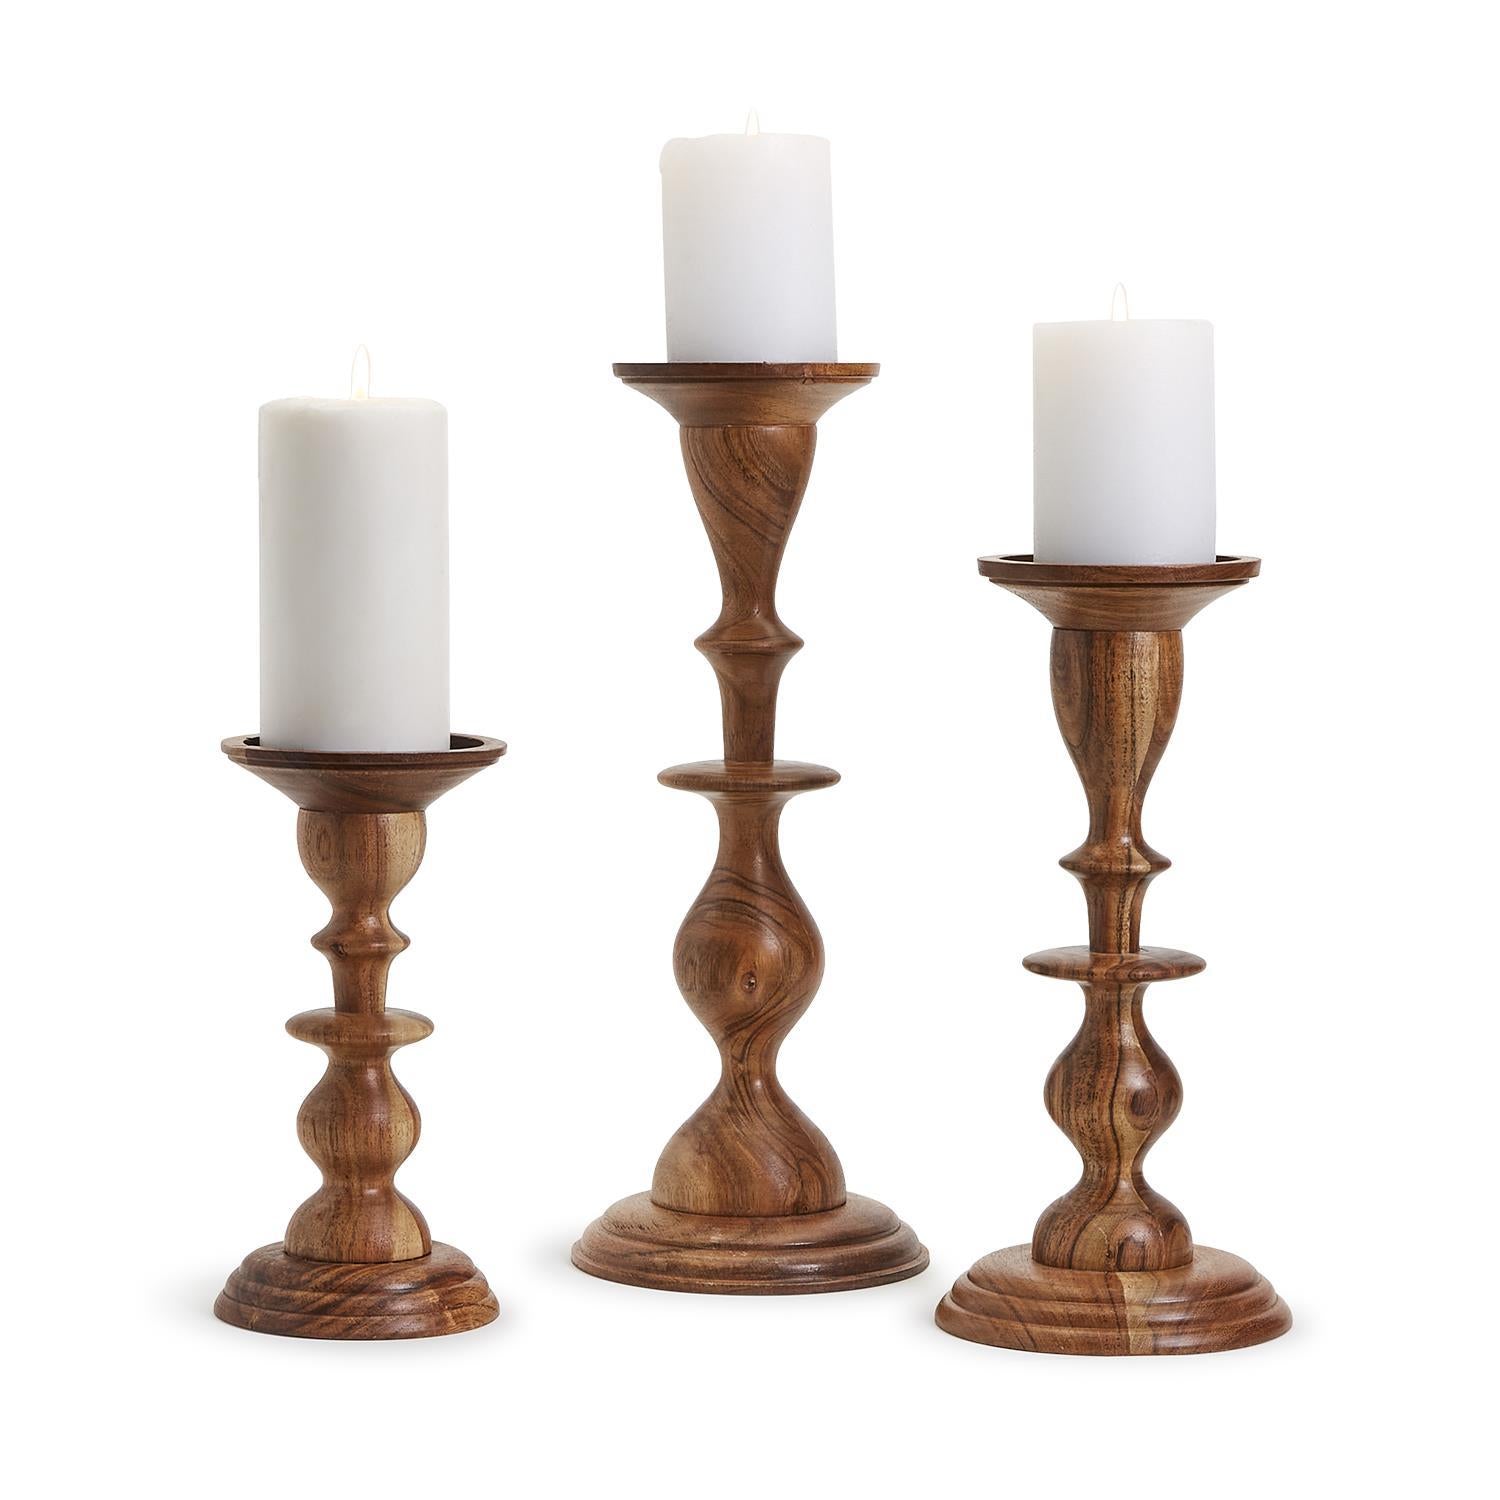 Two's Company Natural Heights Set of 3 Hand-Crafted Pillar Candleholders Includes 3 Design/Sizes